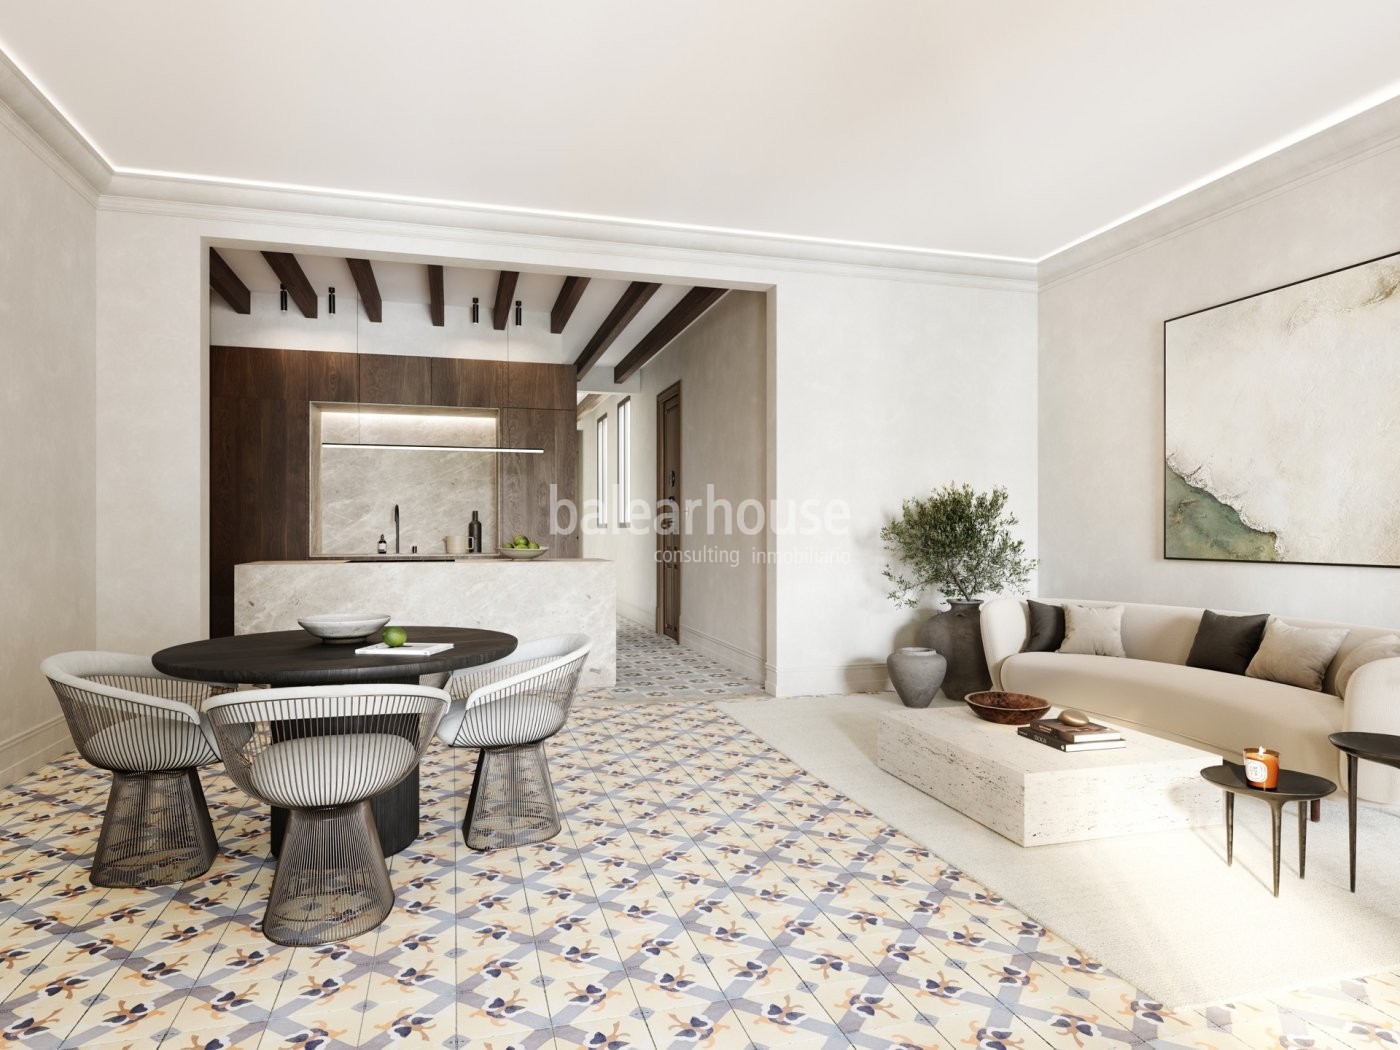 Elegant apartment in iconic and historic building in downtown Palma.